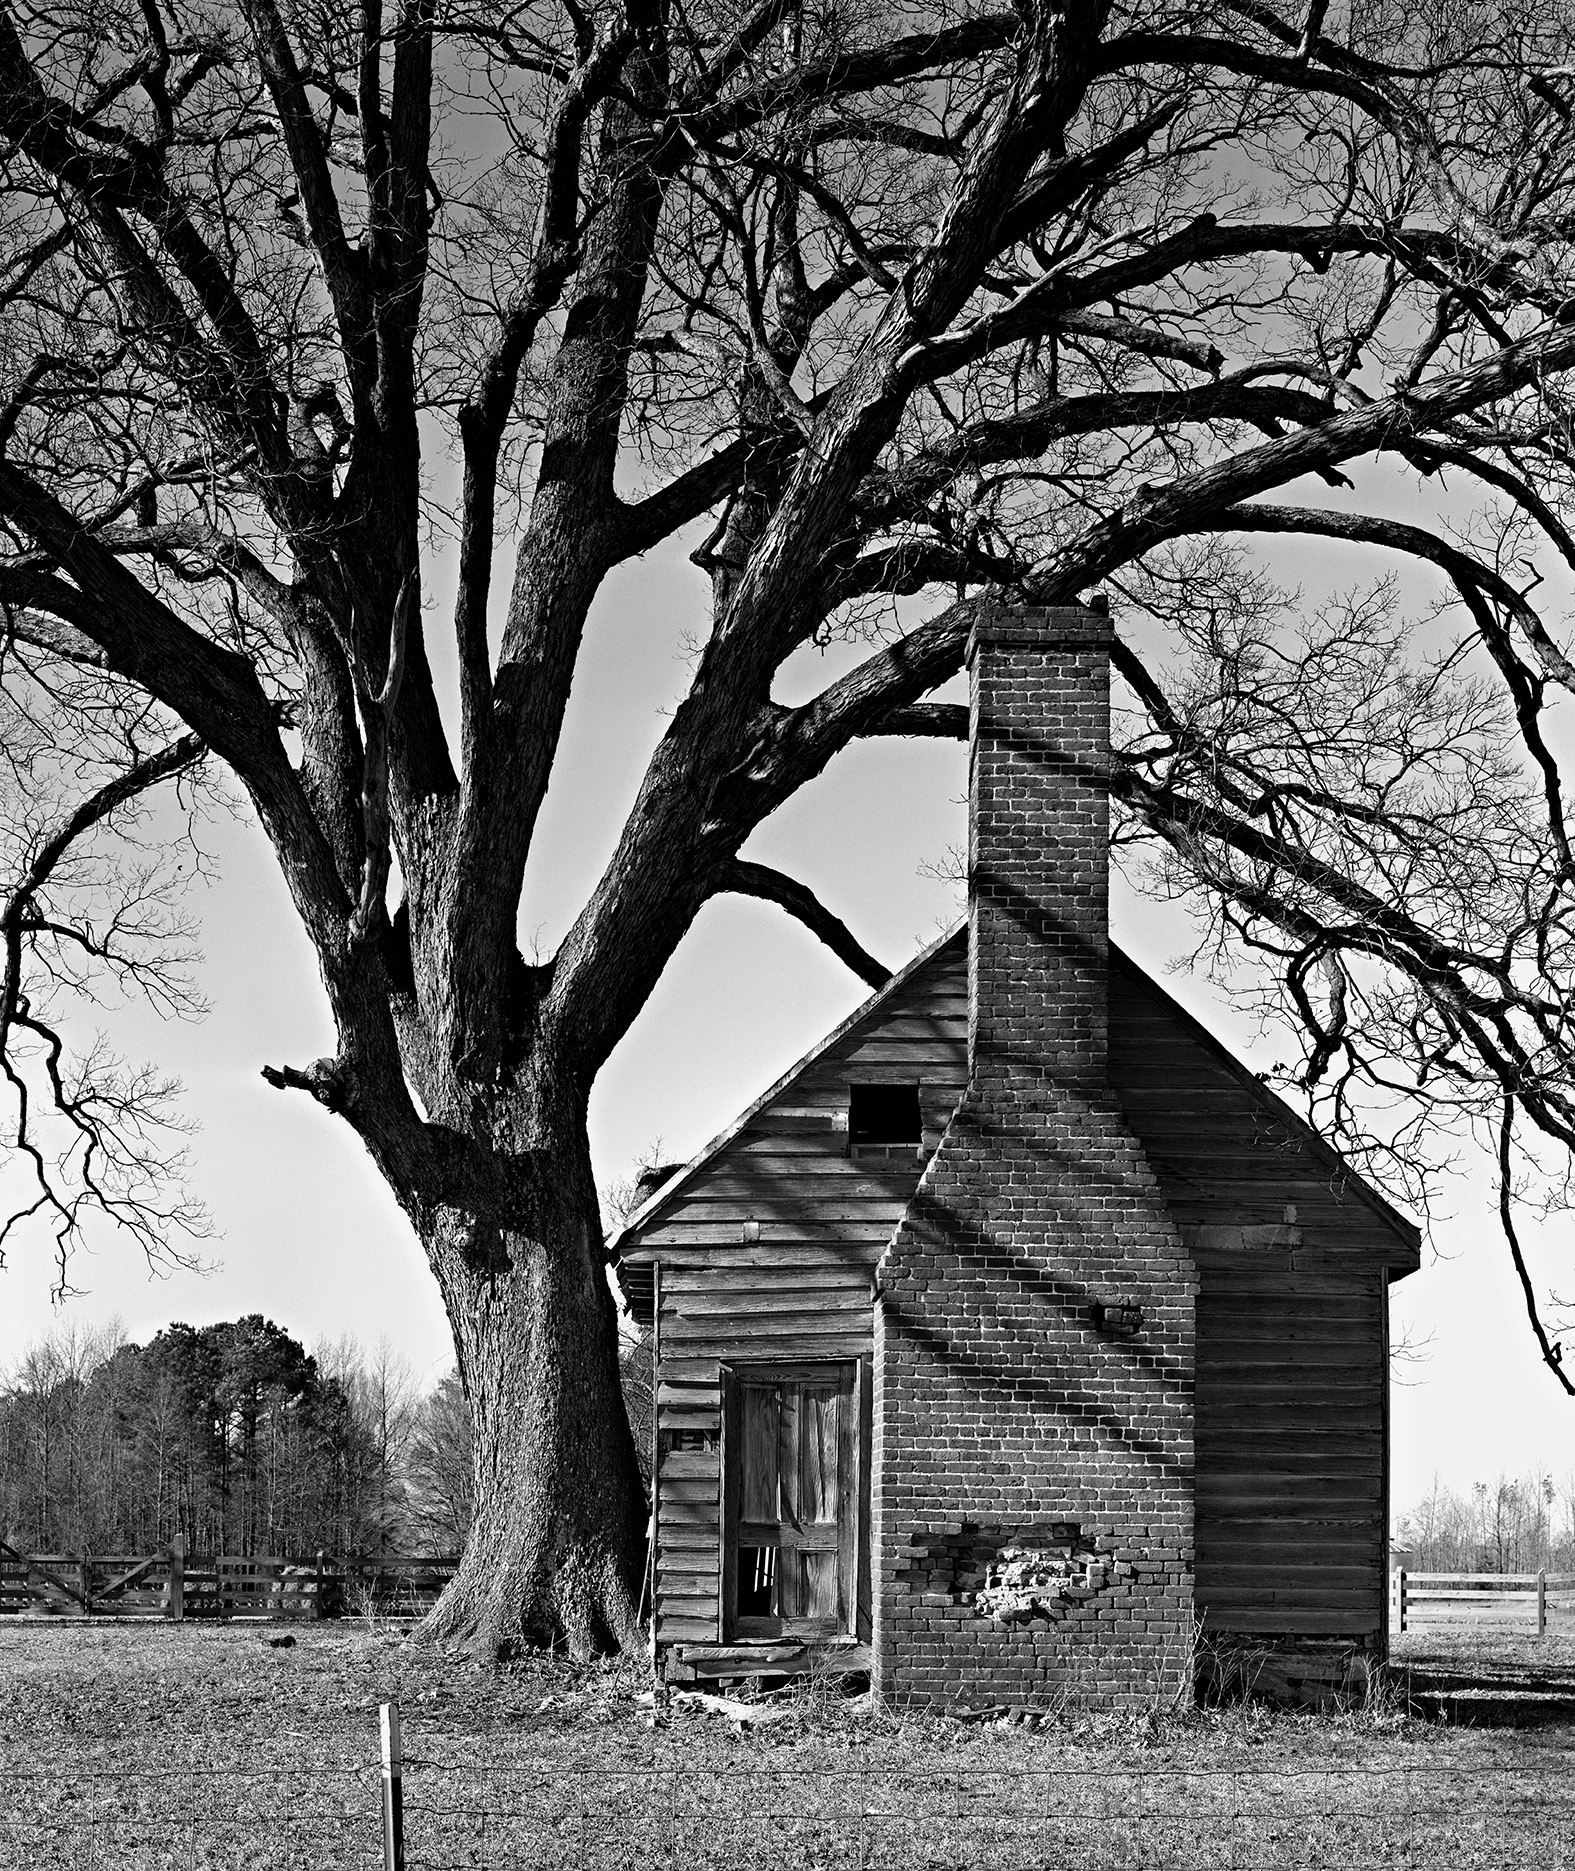 Black and white photo of a wooden cottage with a large tree in the yard.